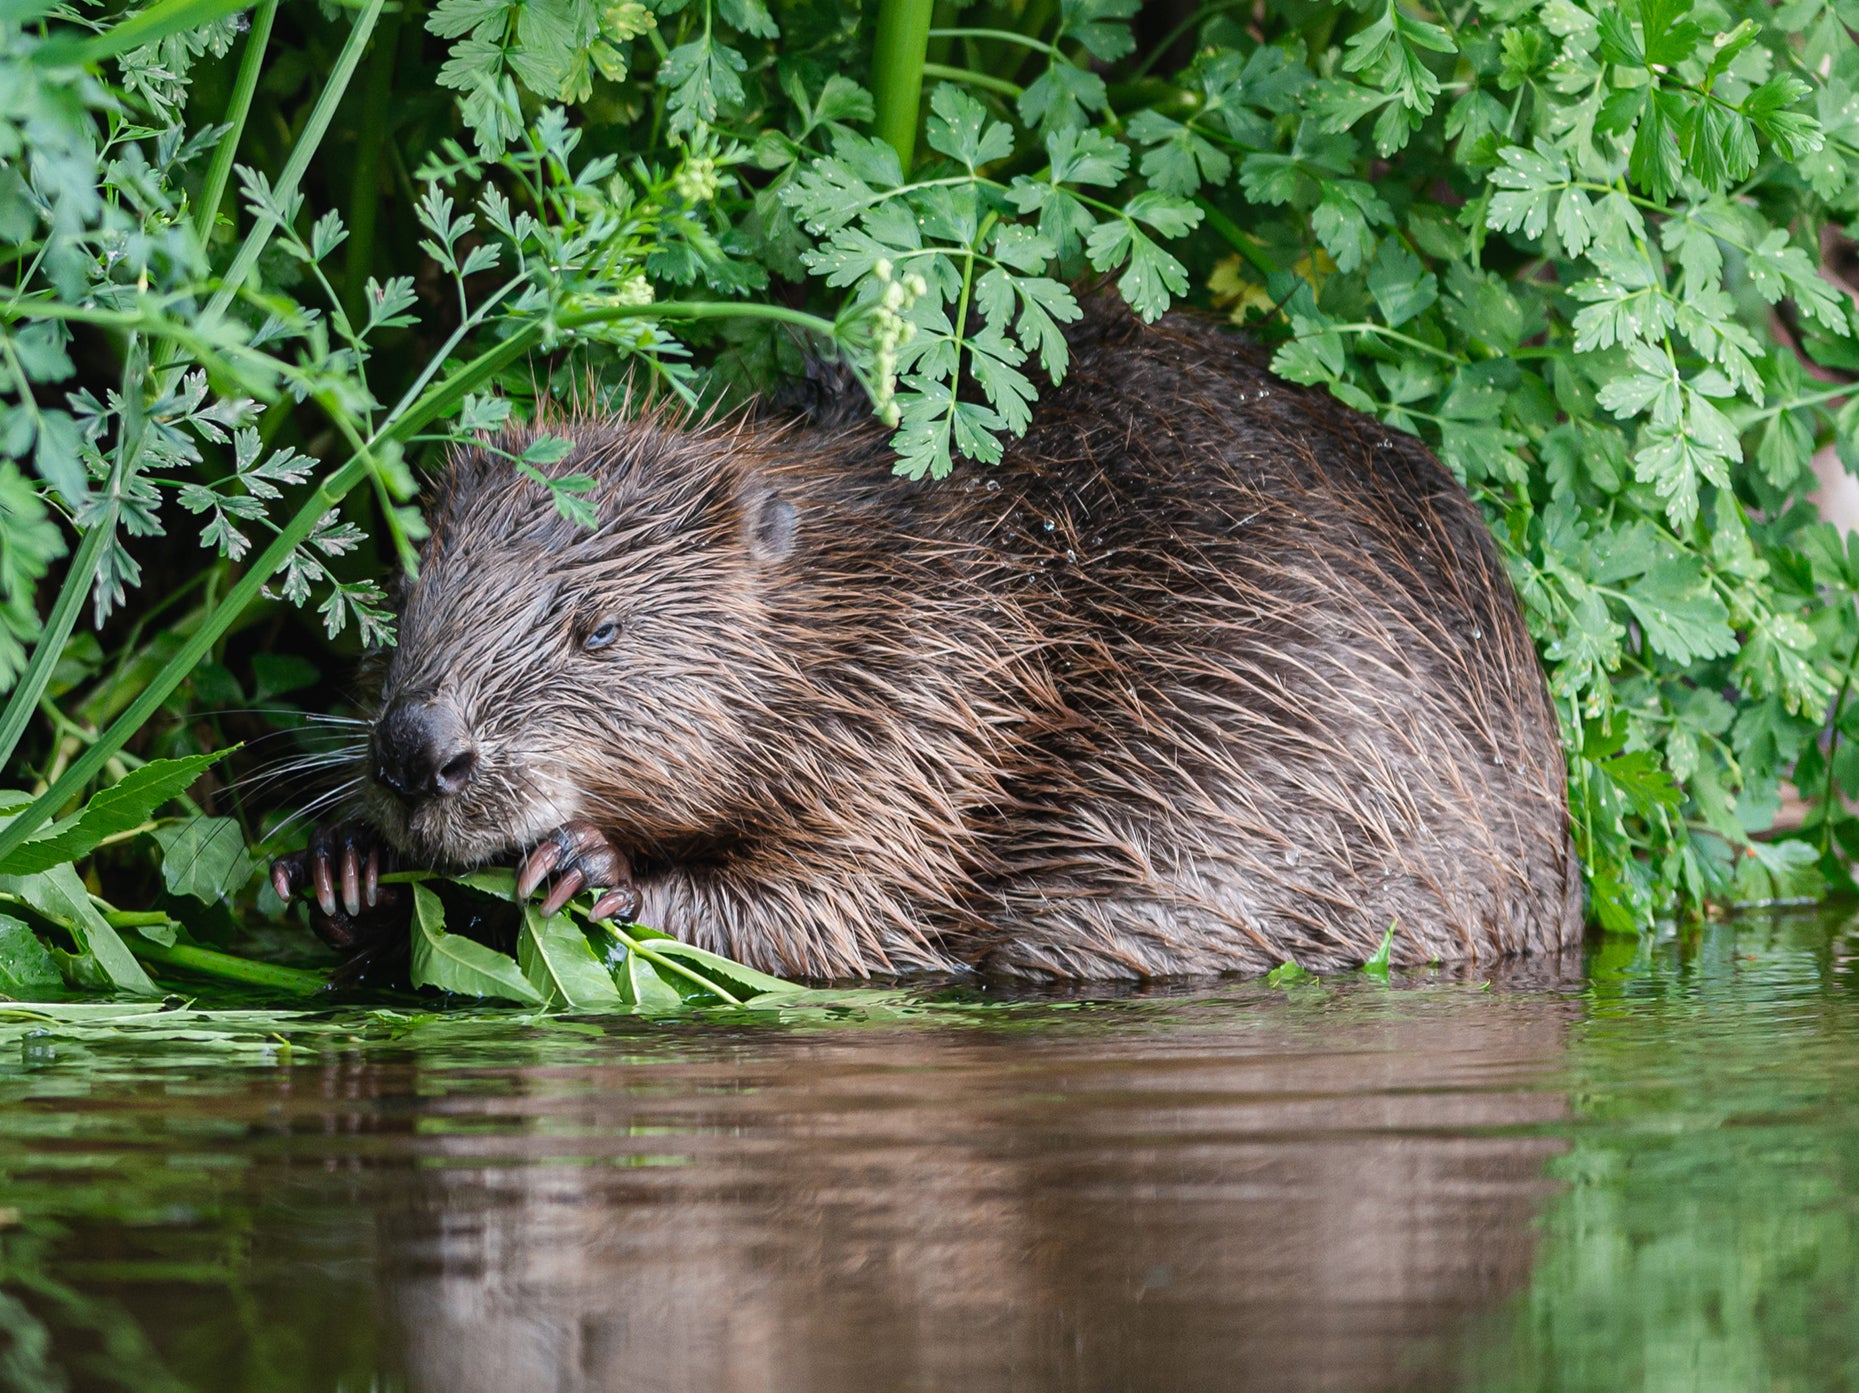 Beavers - hunted to extinction for its fur, glands and meat in the 16th century - are set to make a comeback